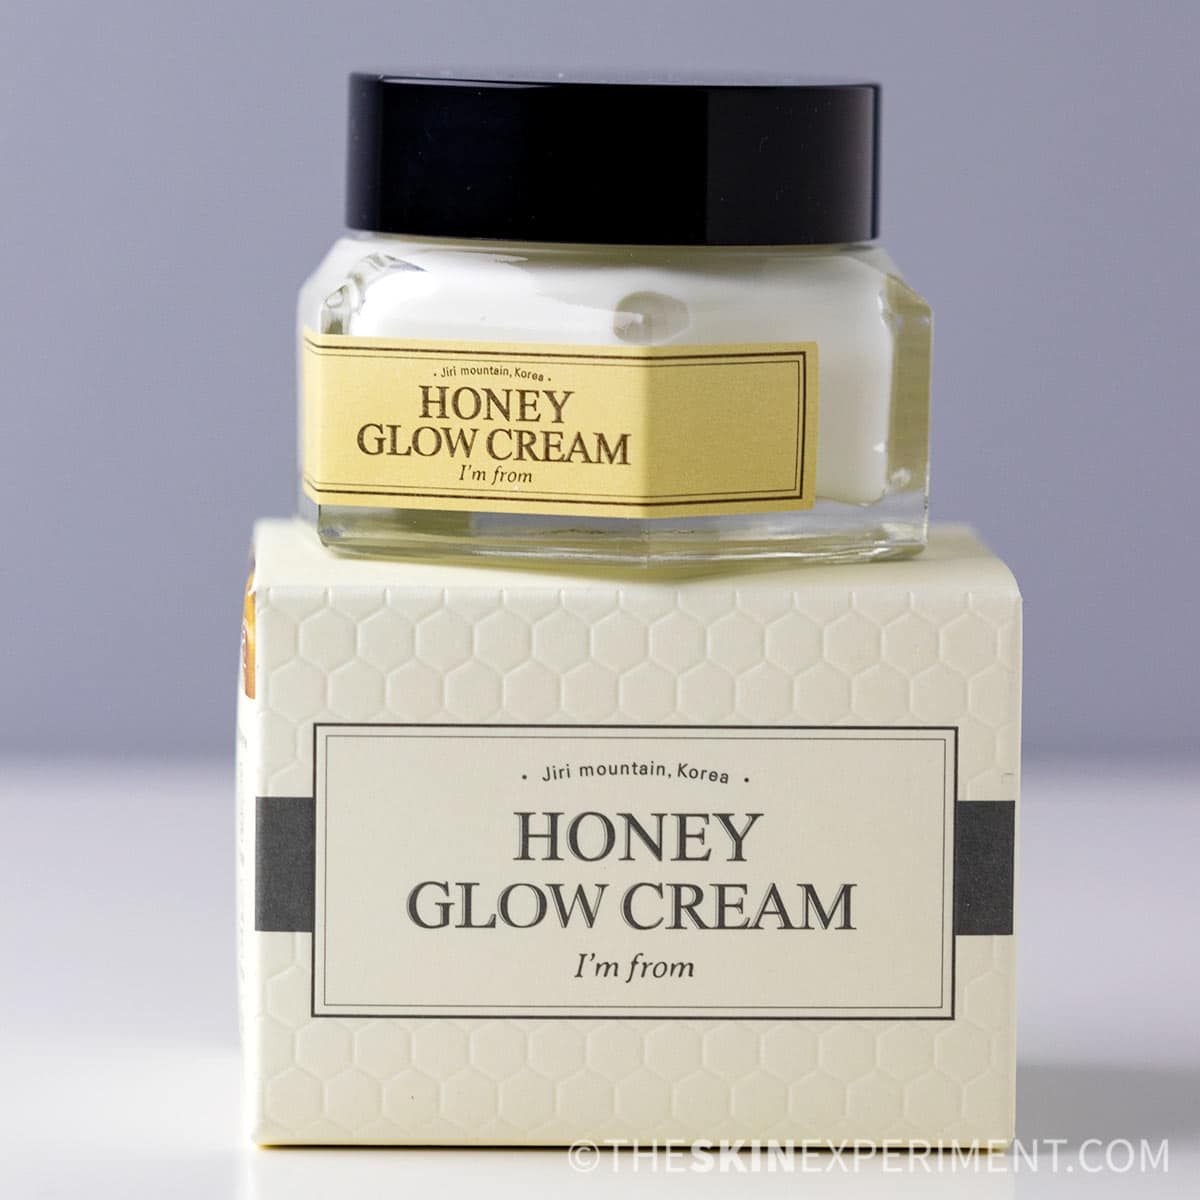 I’m From Honey Glow Cream Review